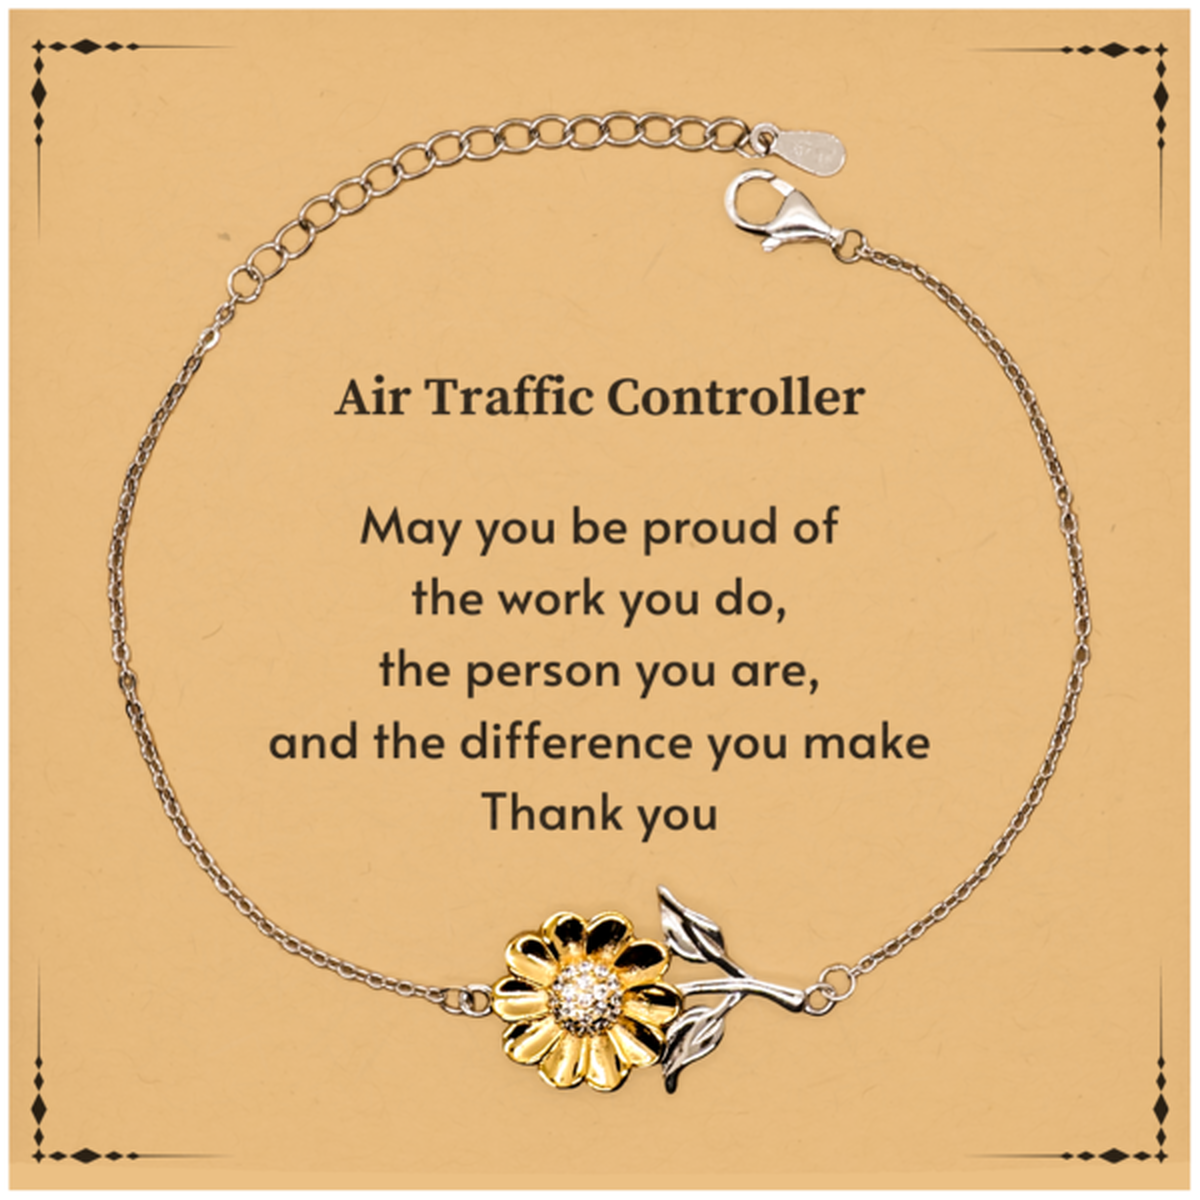 Heartwarming Sunflower Bracelet Retirement Coworkers Gifts for Air Traffic Controller, Air Traffic Controller May You be proud of the work you do, the person you are Gifts for Boss Men Women Friends